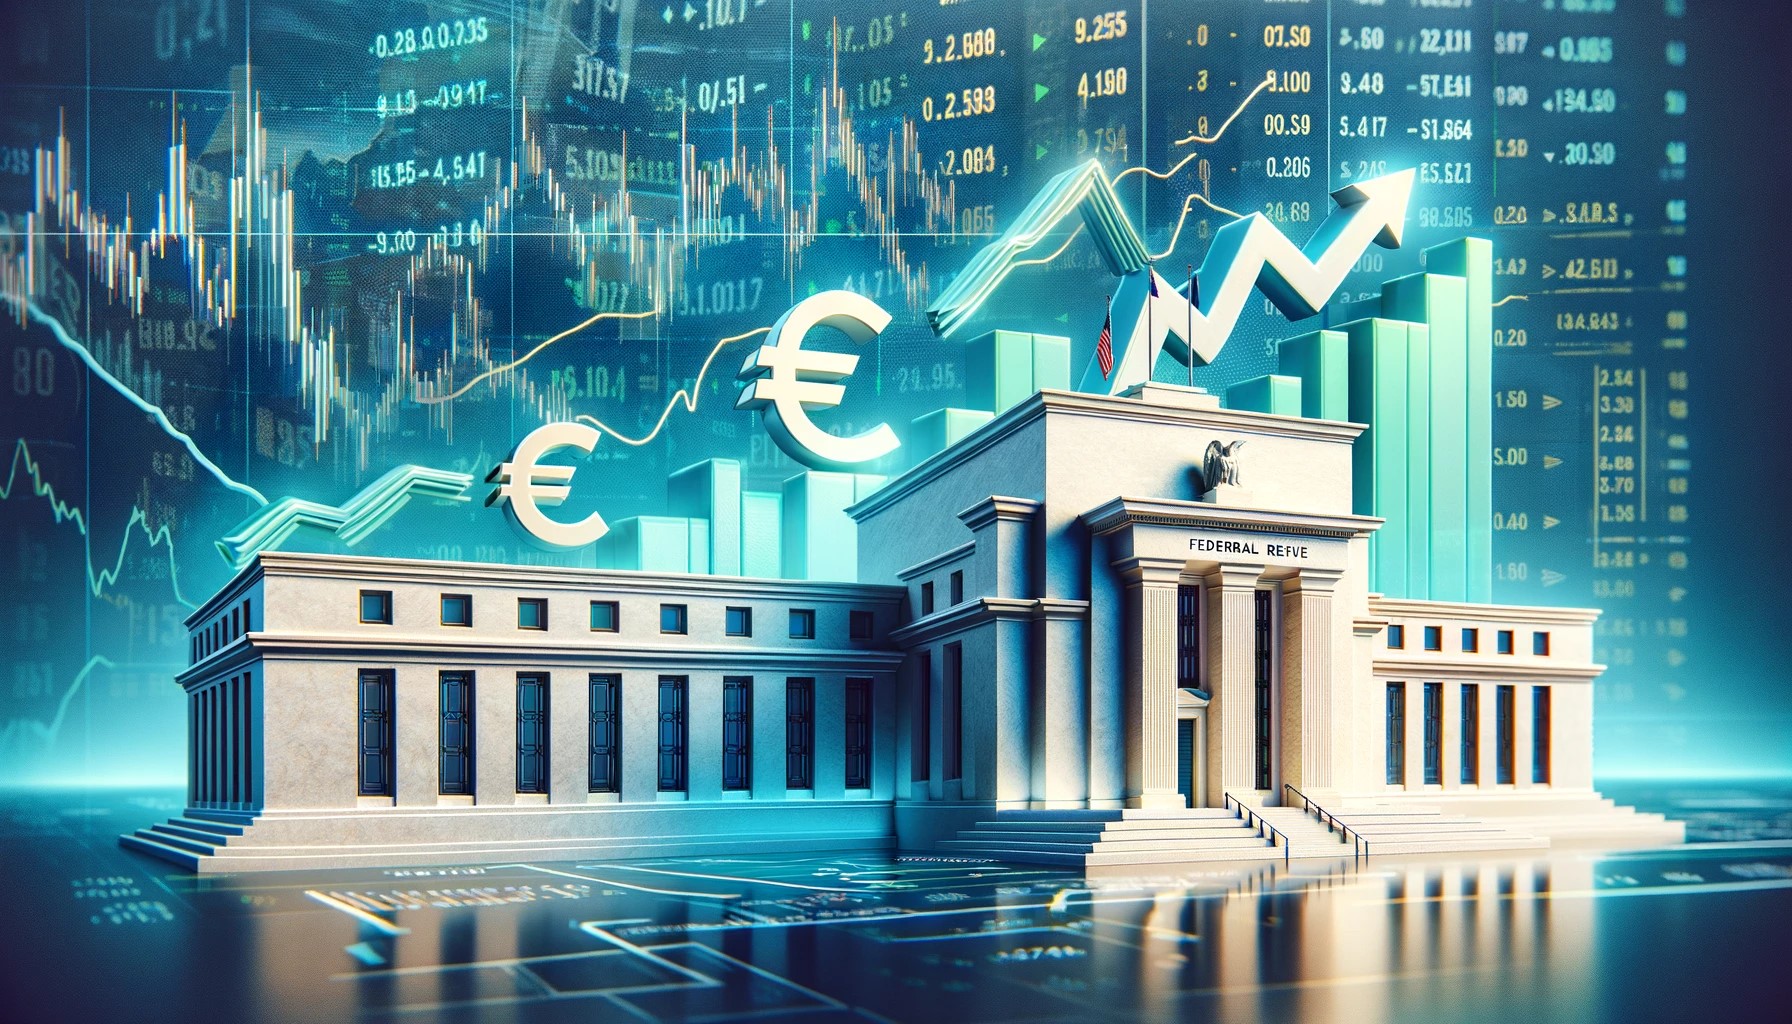 PCE data ahead this week, ECB’s rate path in focus – what’s moving markets